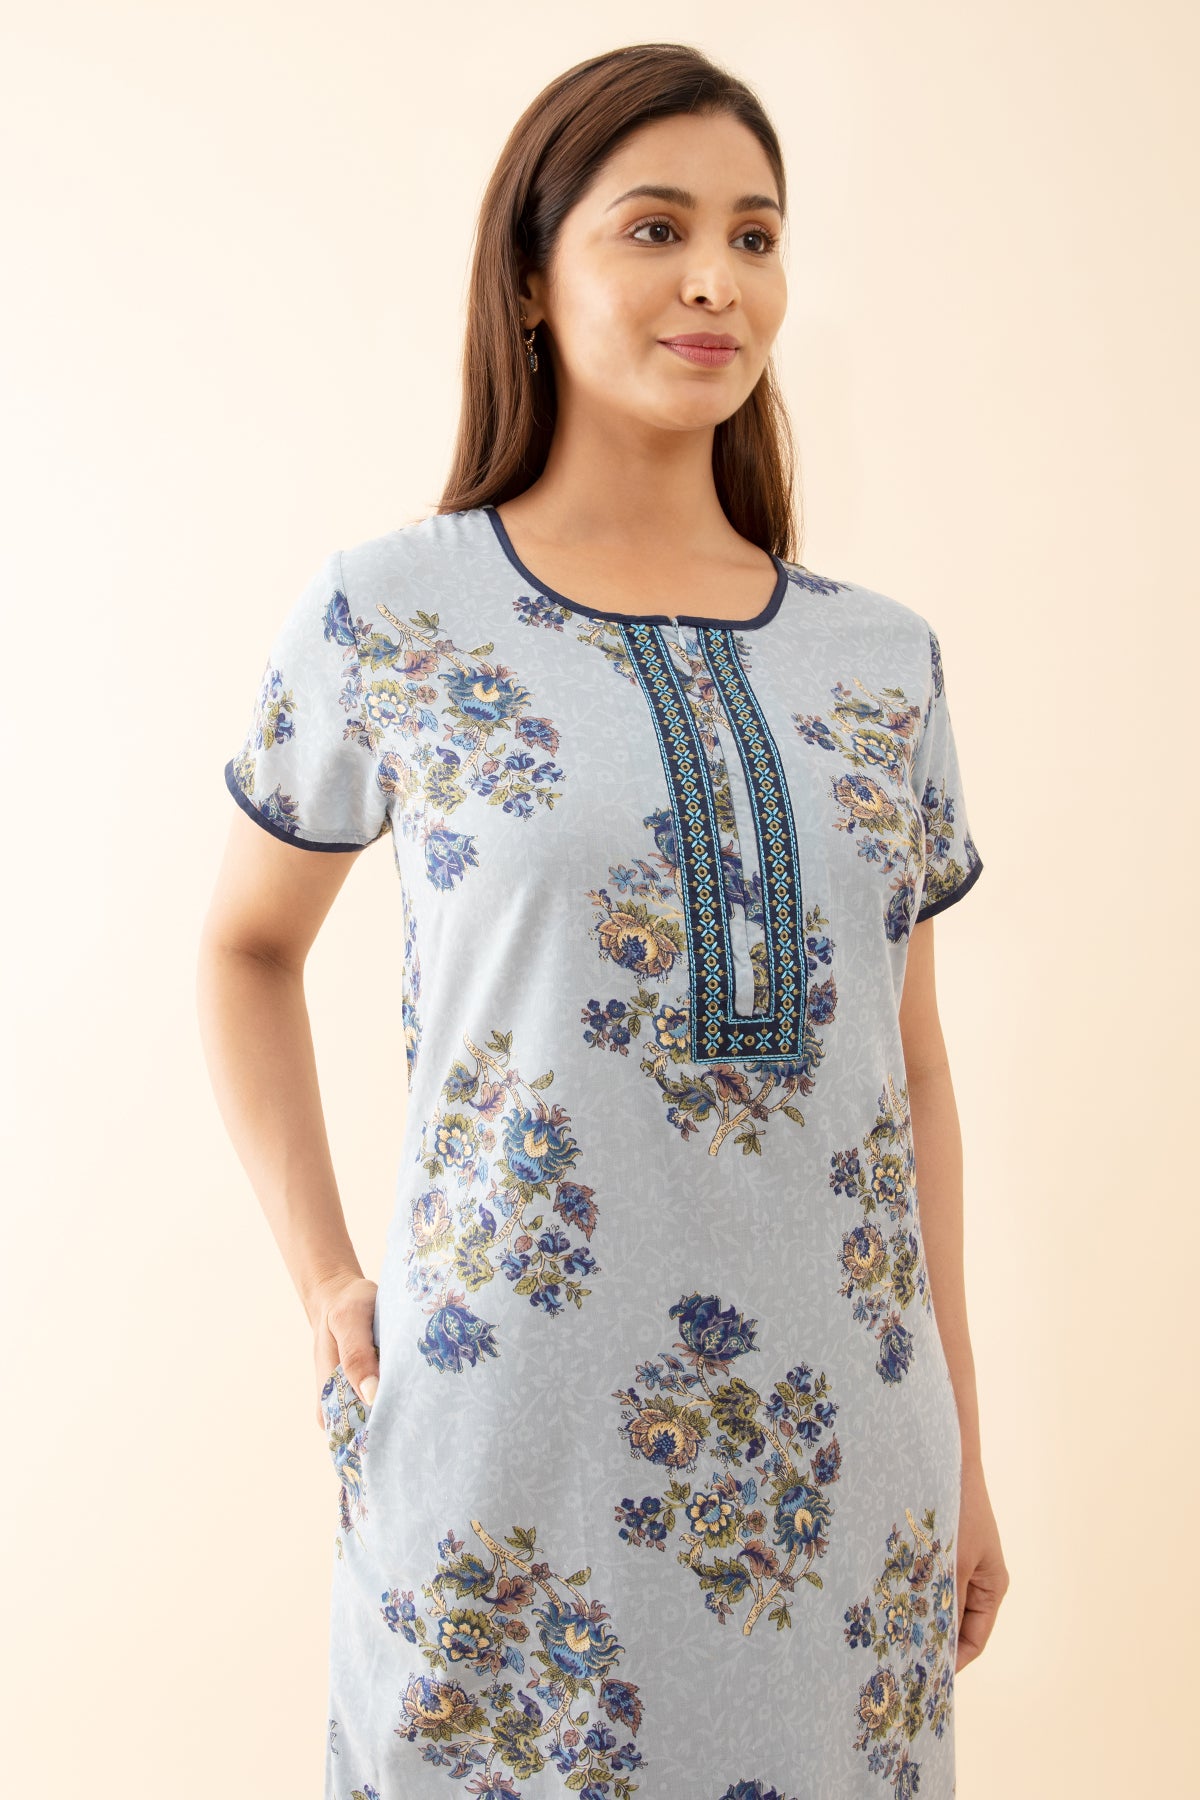 Acanthus Floral Printed Nighty with Embroidered Neckline - Blue